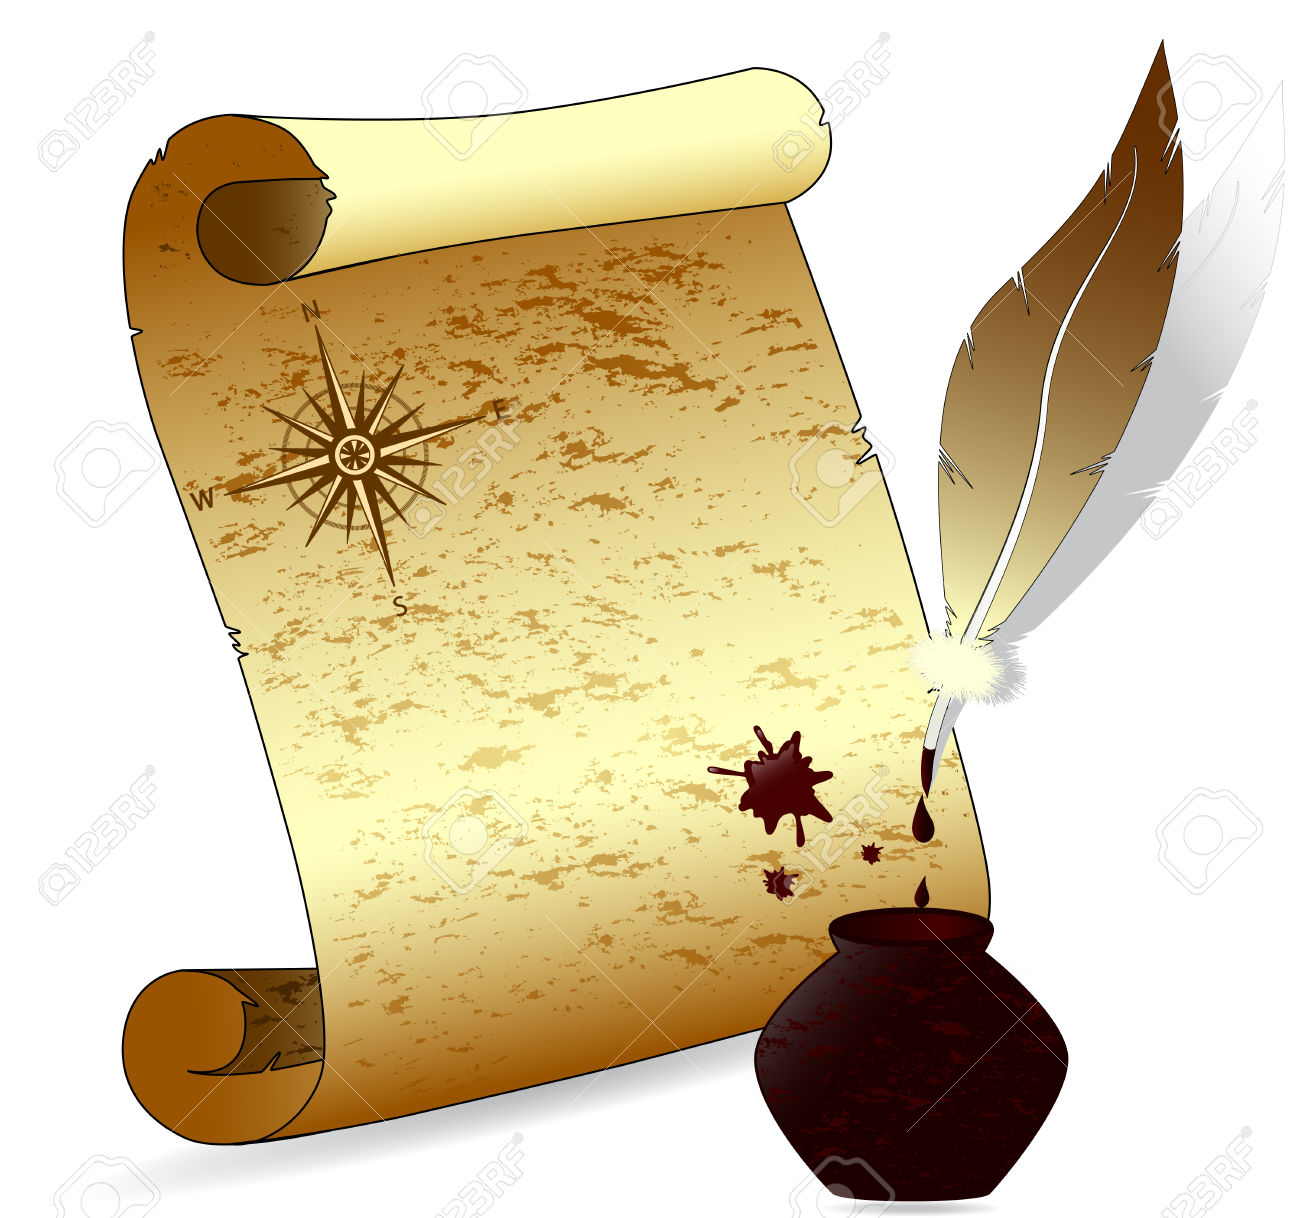 history-clipart-feather-pen-20